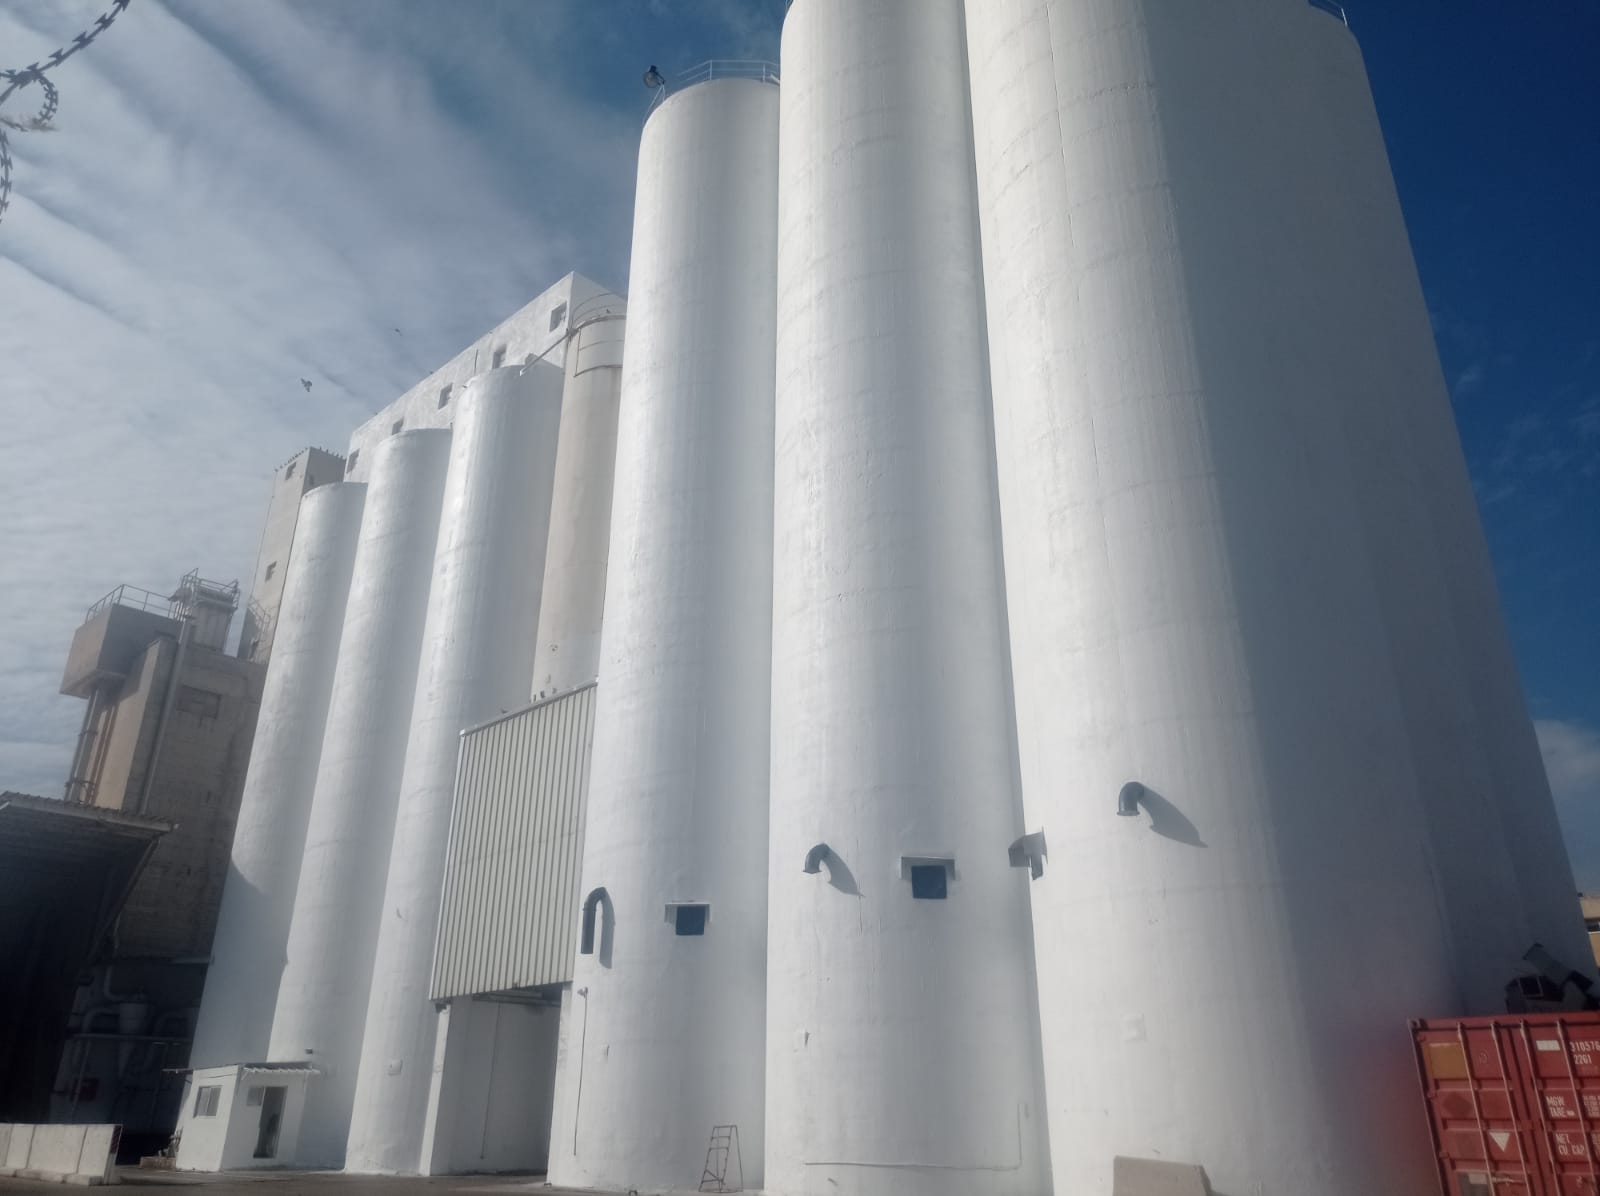 silos after fresh and clean exterior painting job